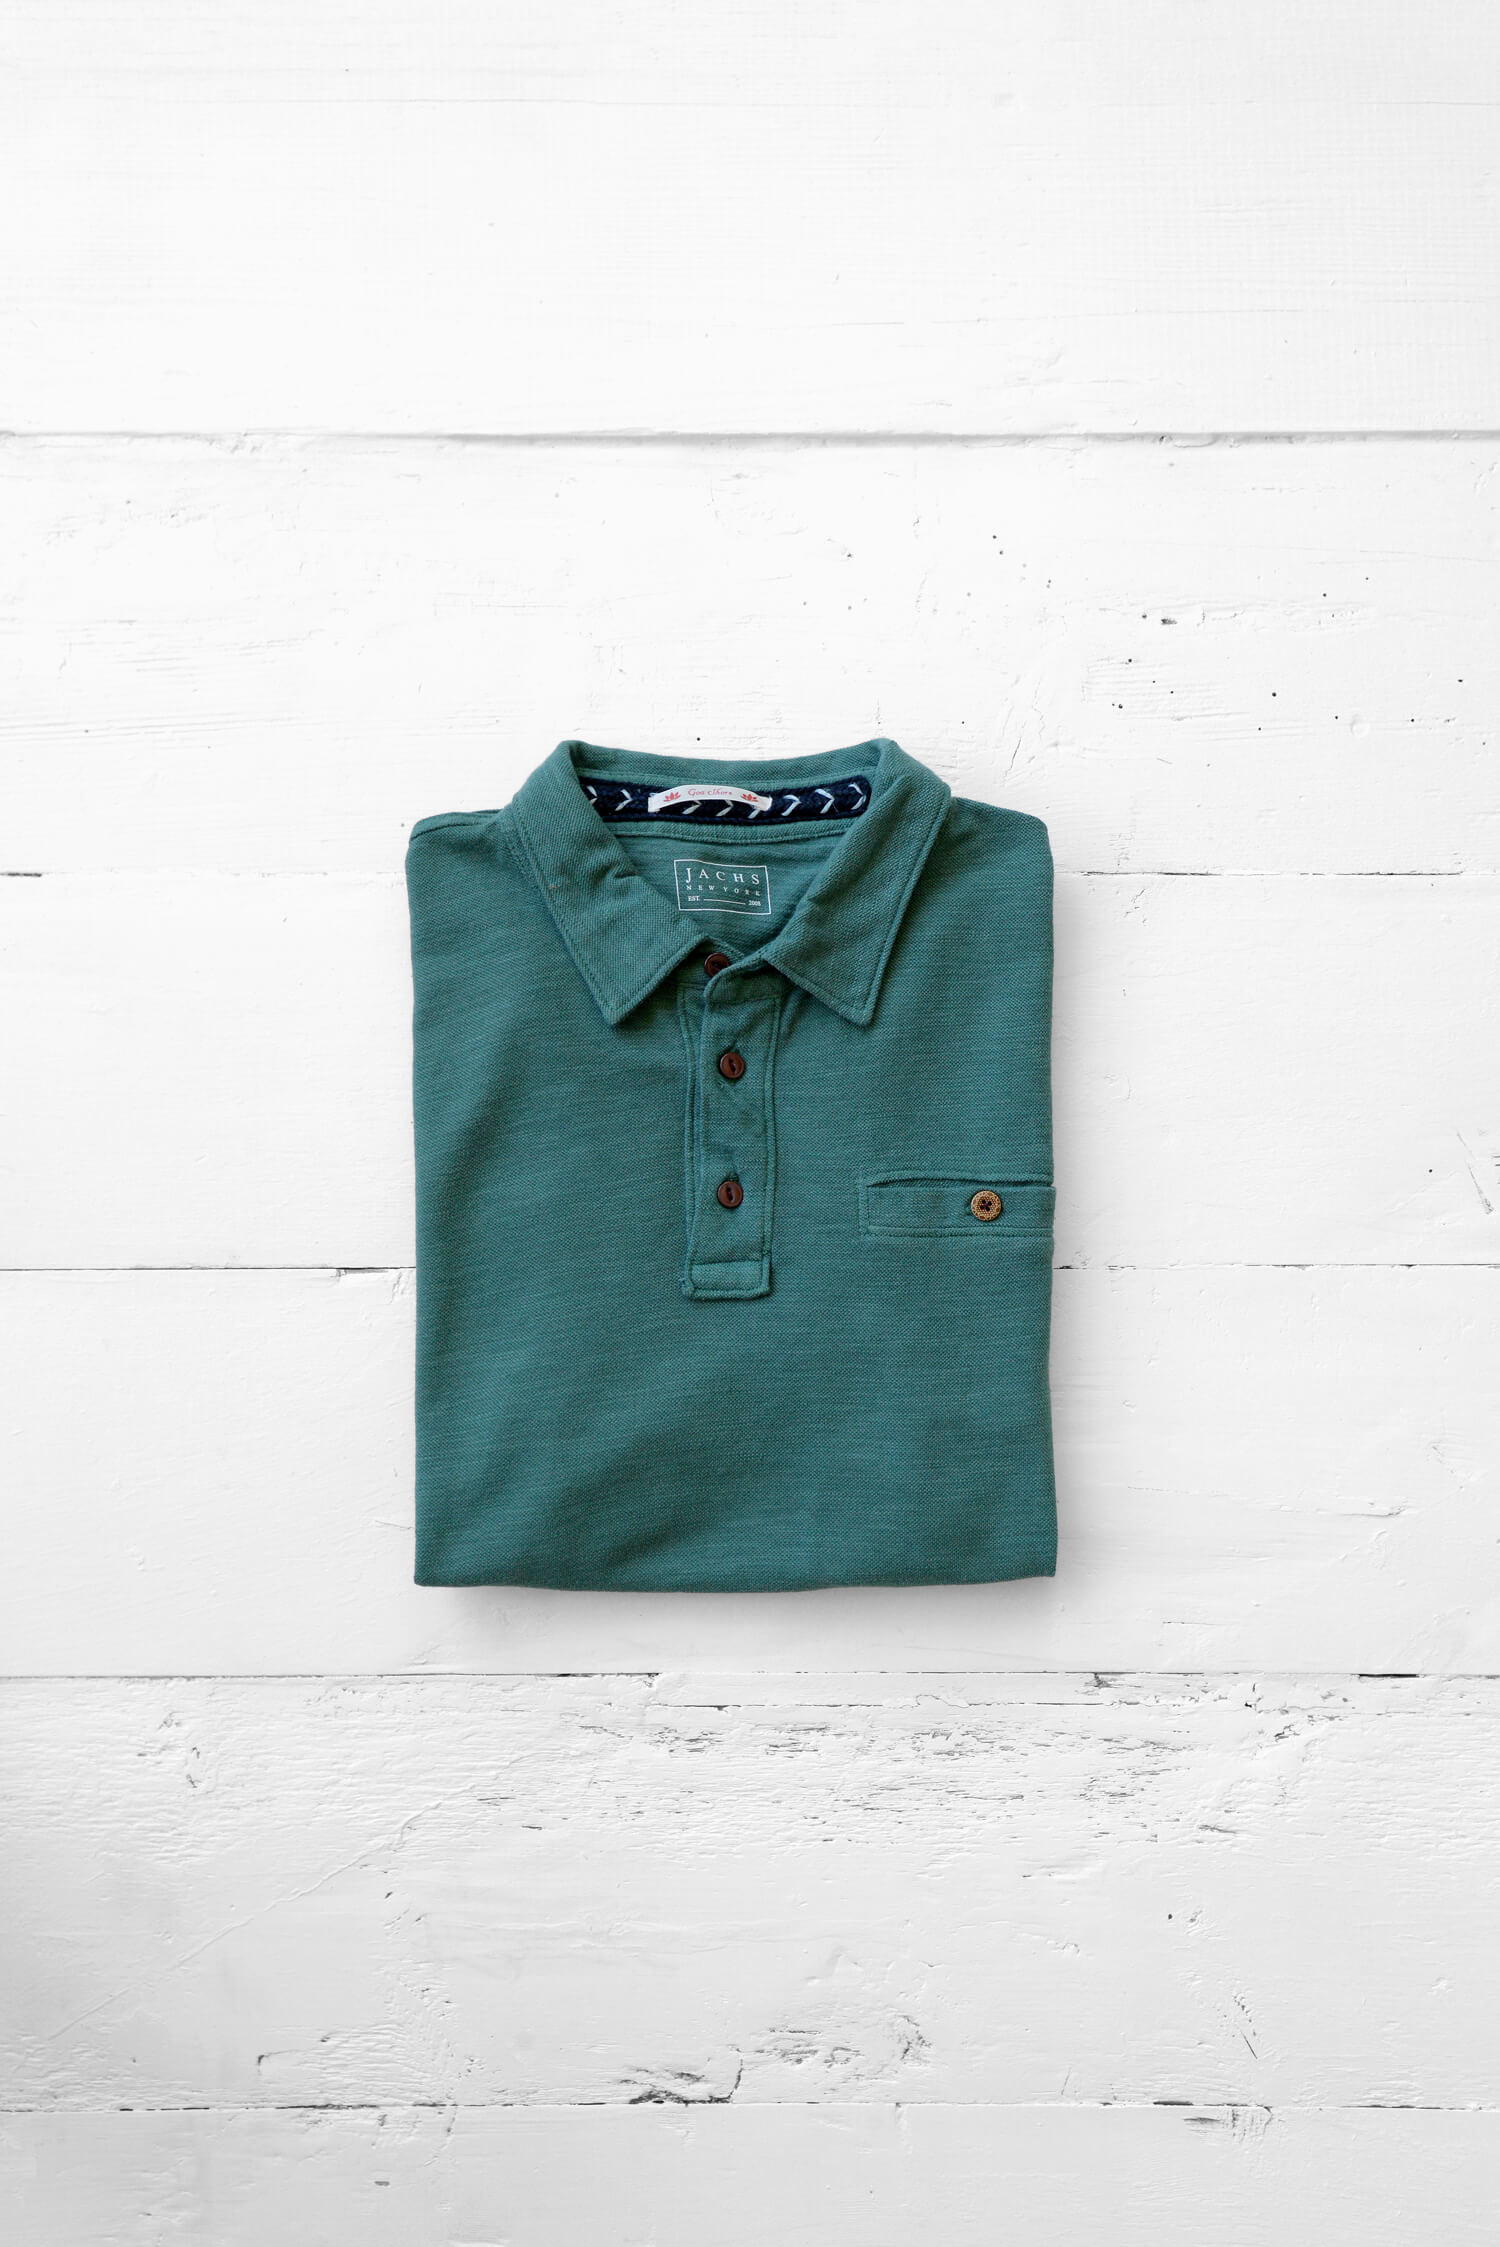 JachsNY Green Washed Pique Polo